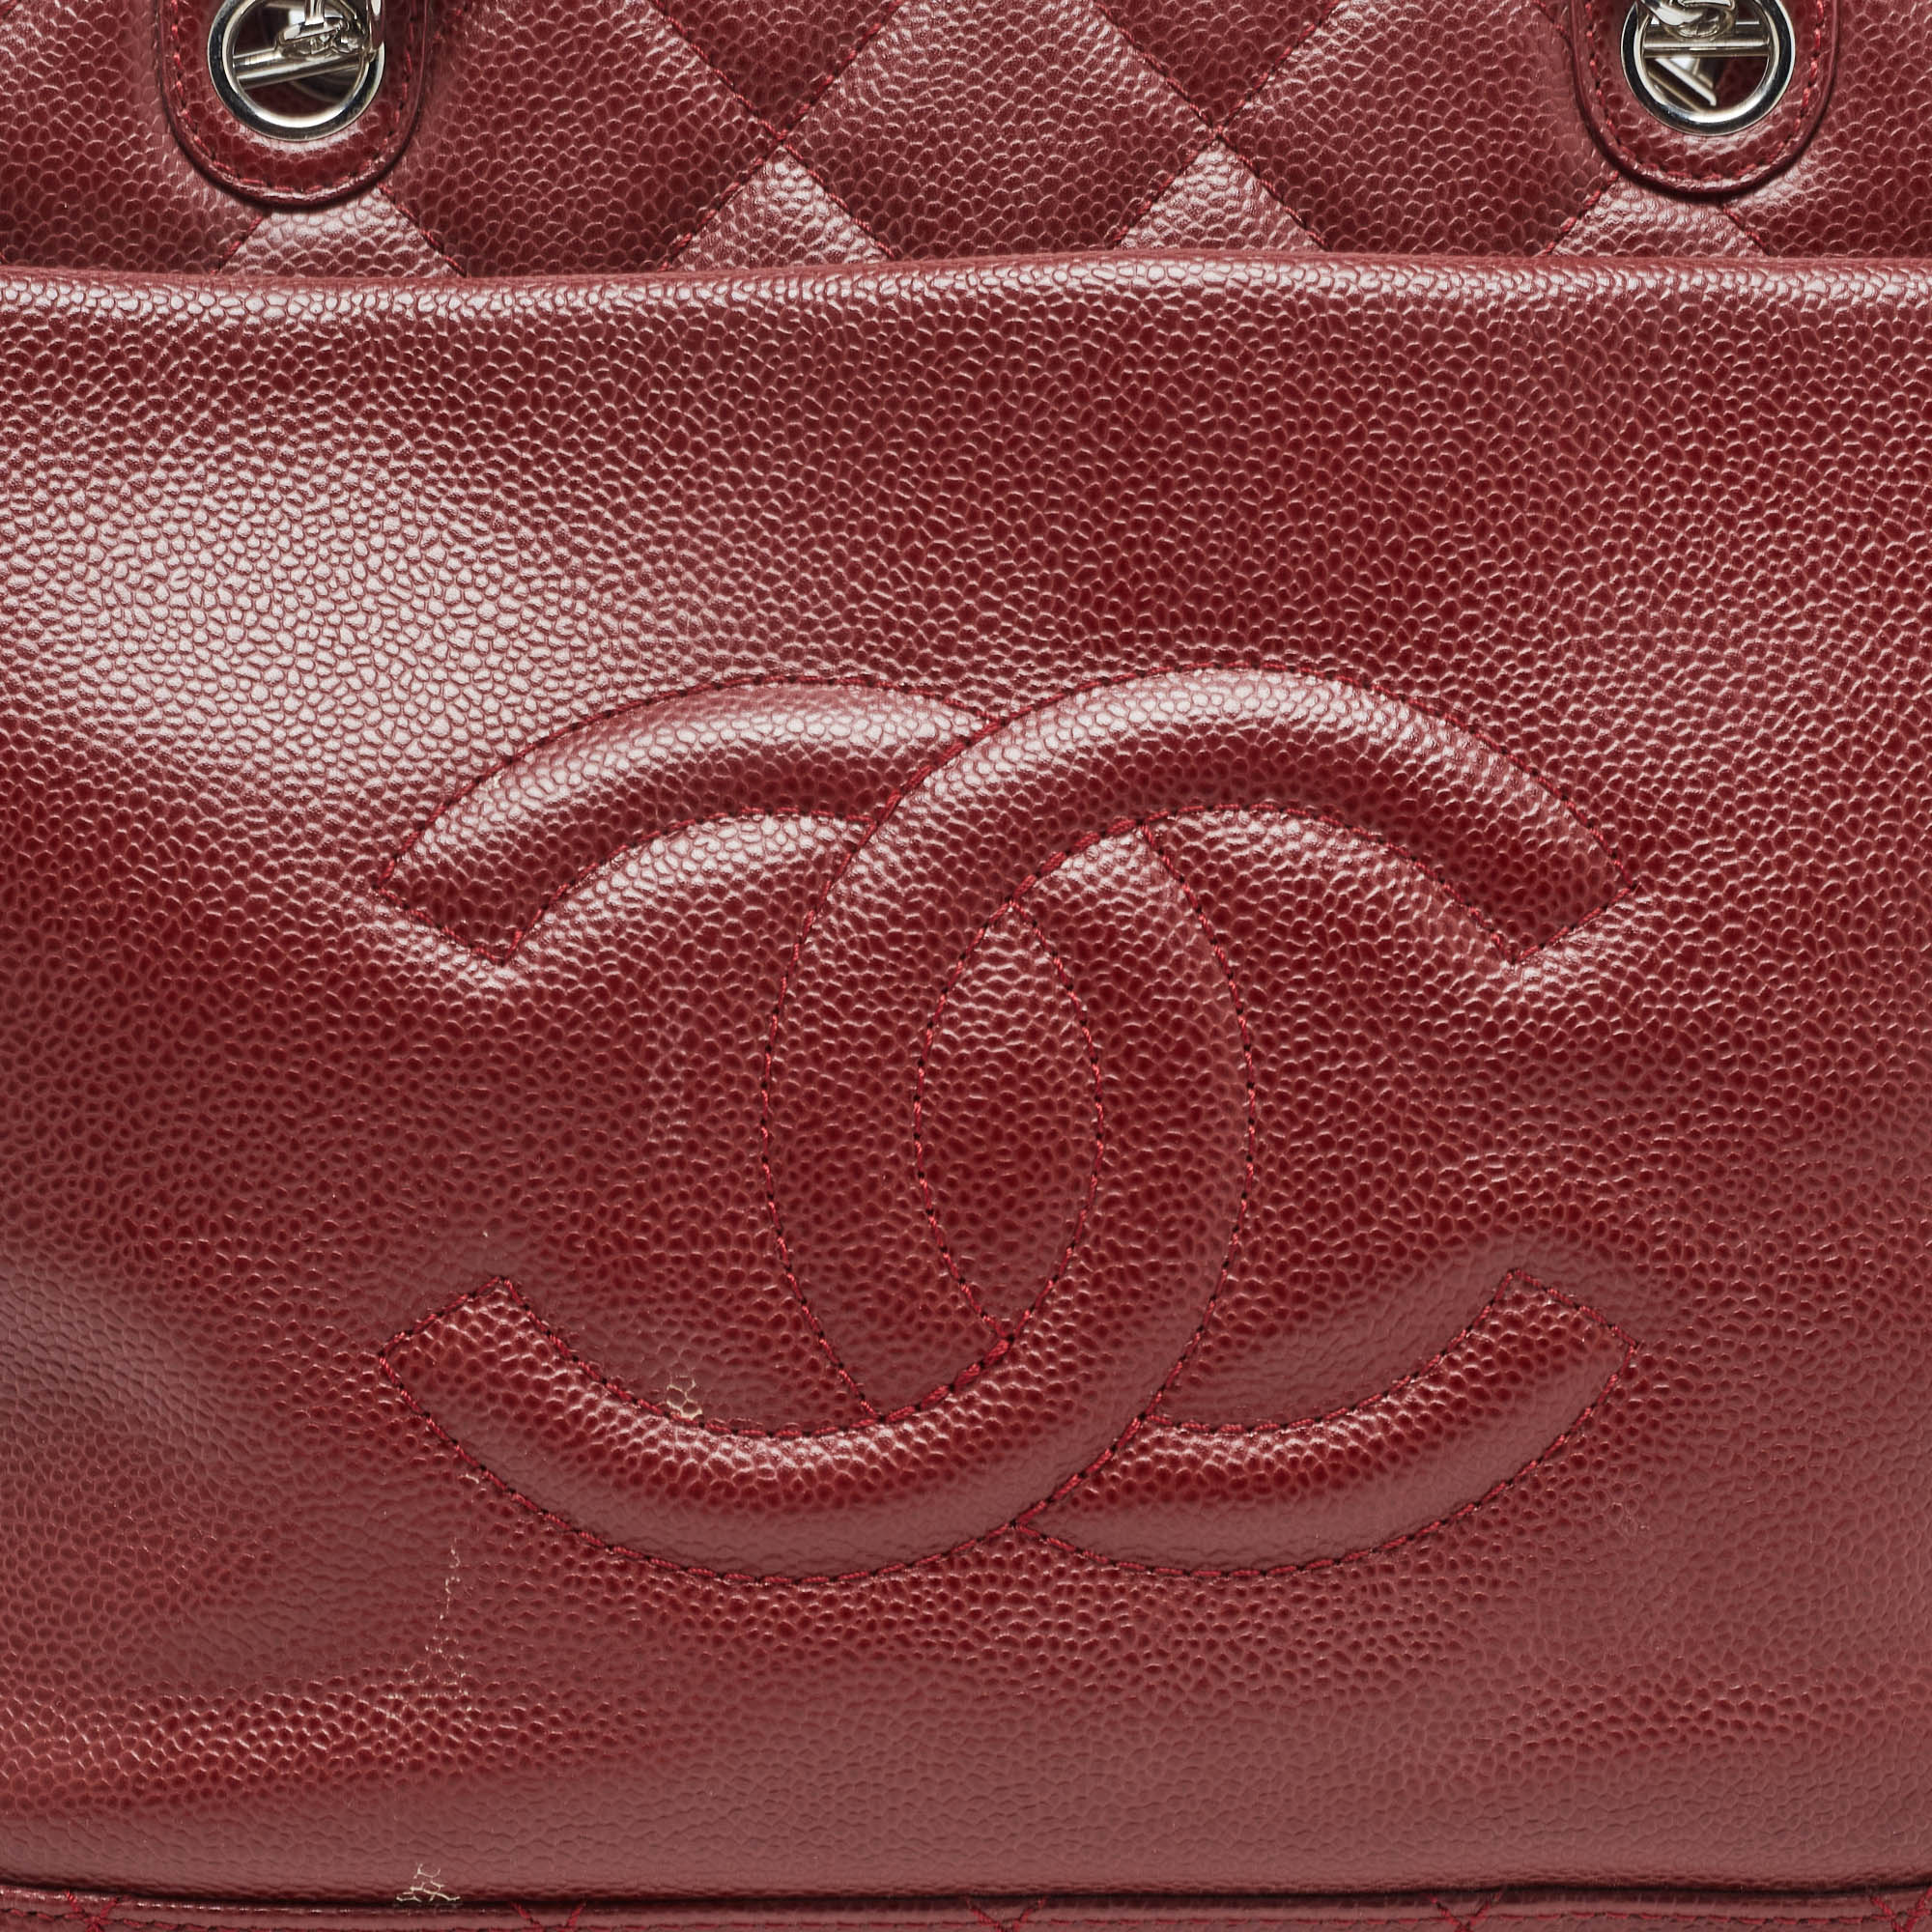 Chanel Red Quilted Caviar Leather Shiva Tote